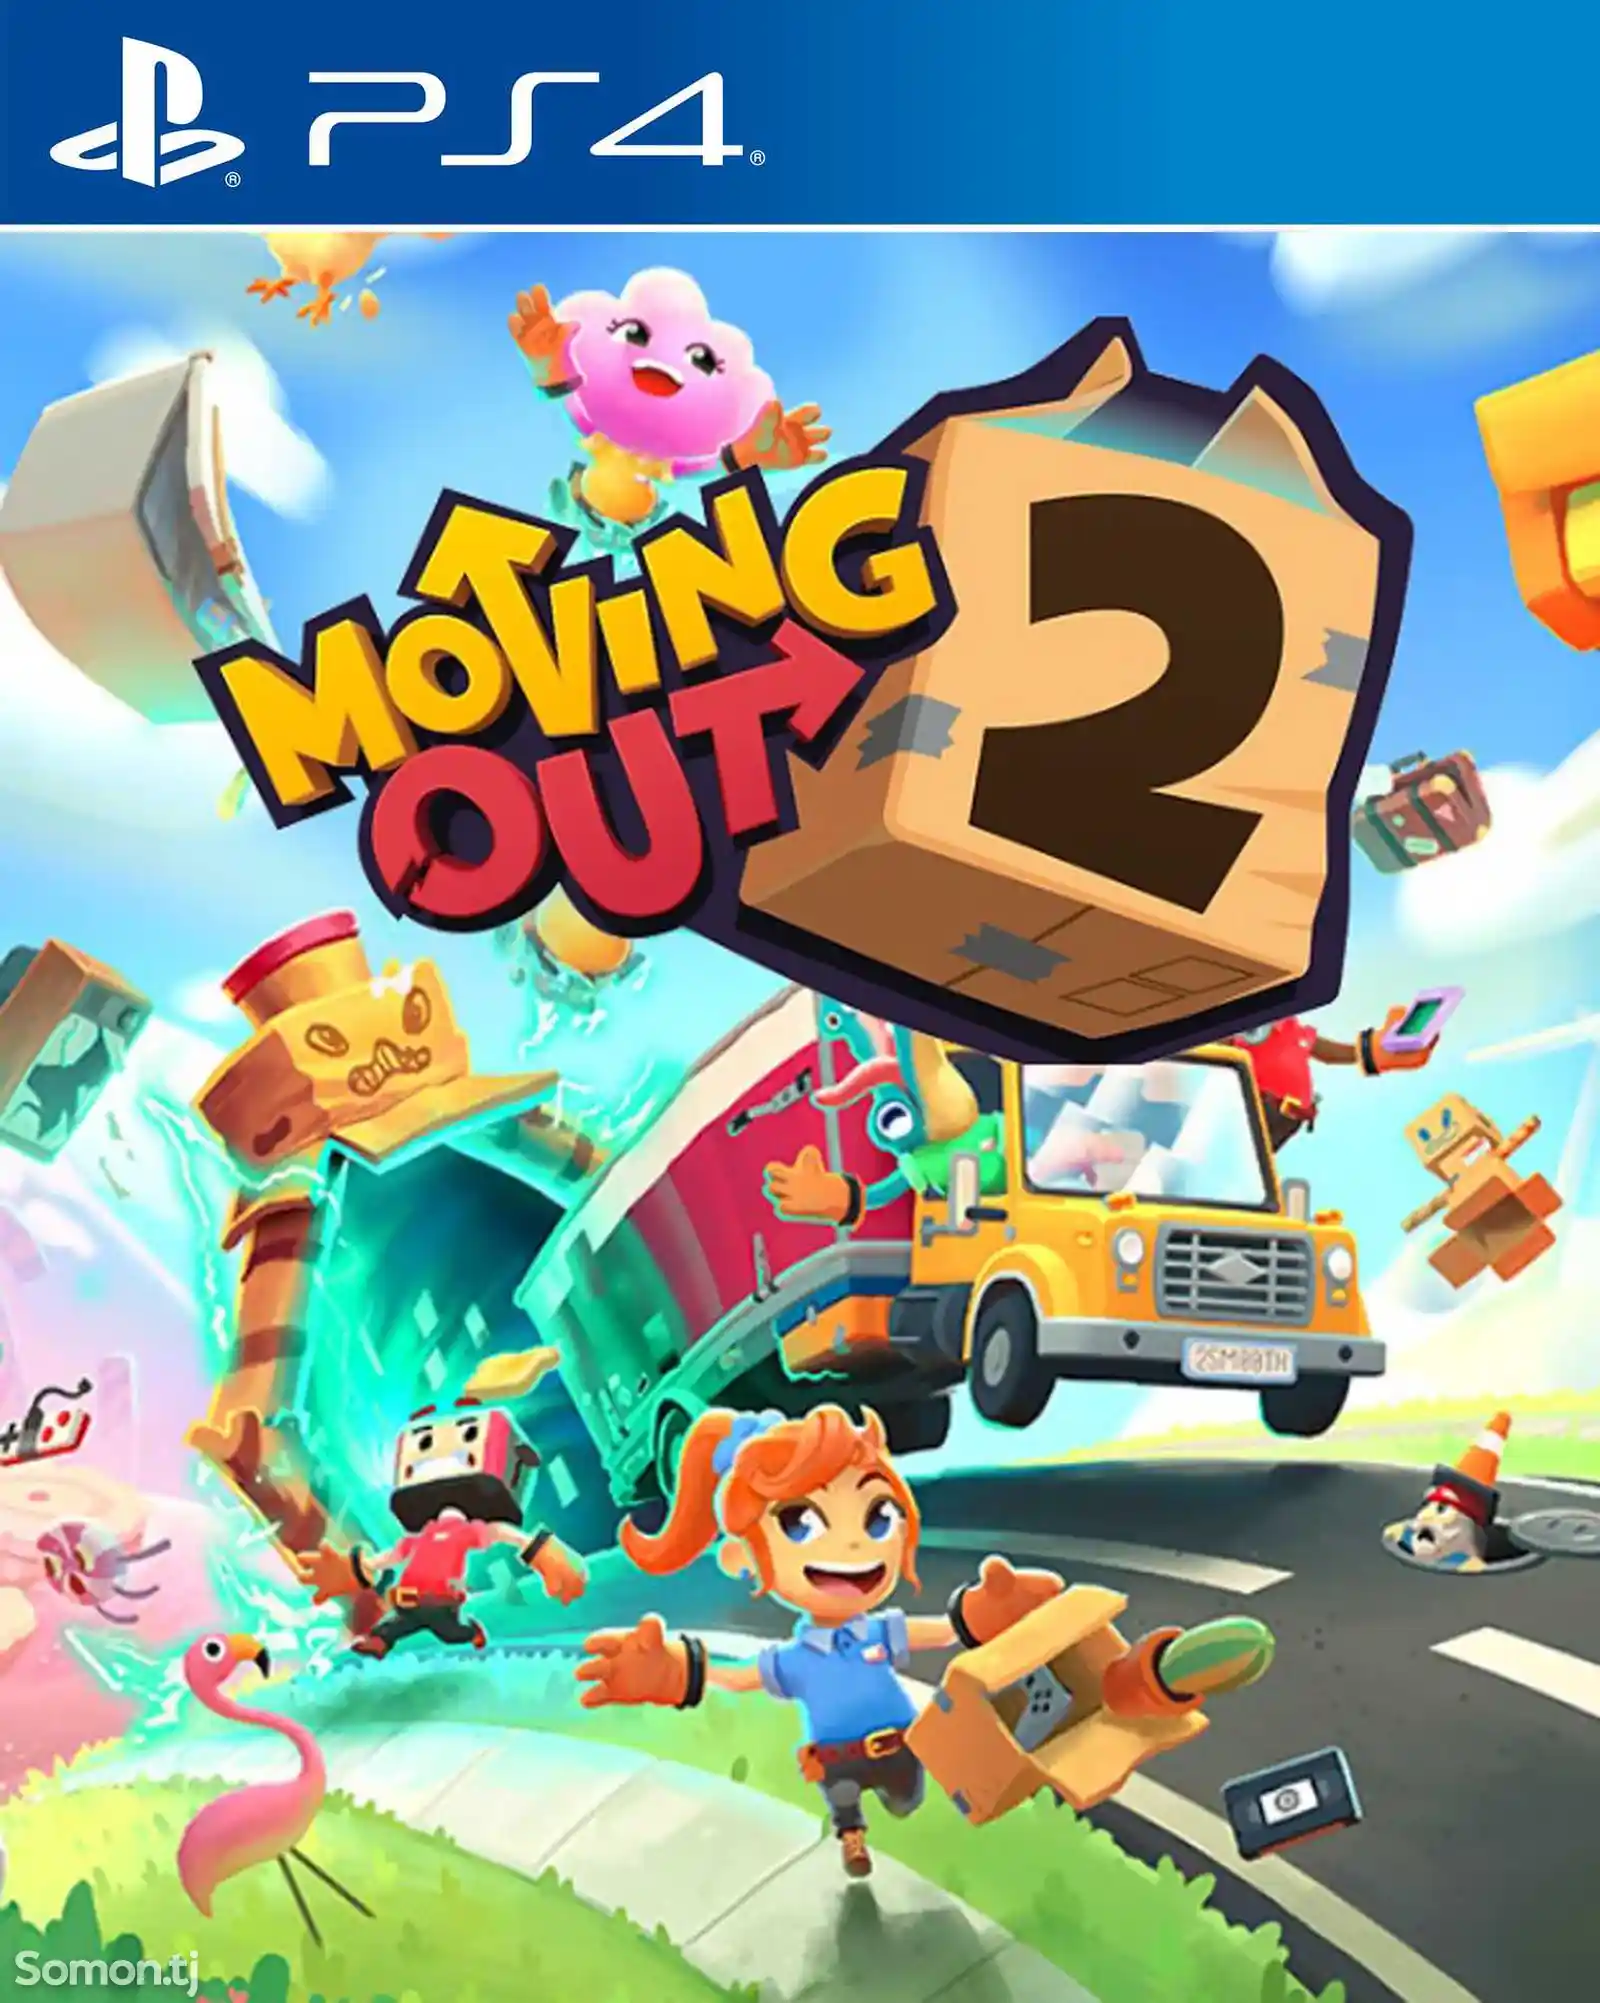 Игра Moving out 2 для PS-4 / 5.05 / 6.72 / 7.02 / 7.55 / 9.00 /-1